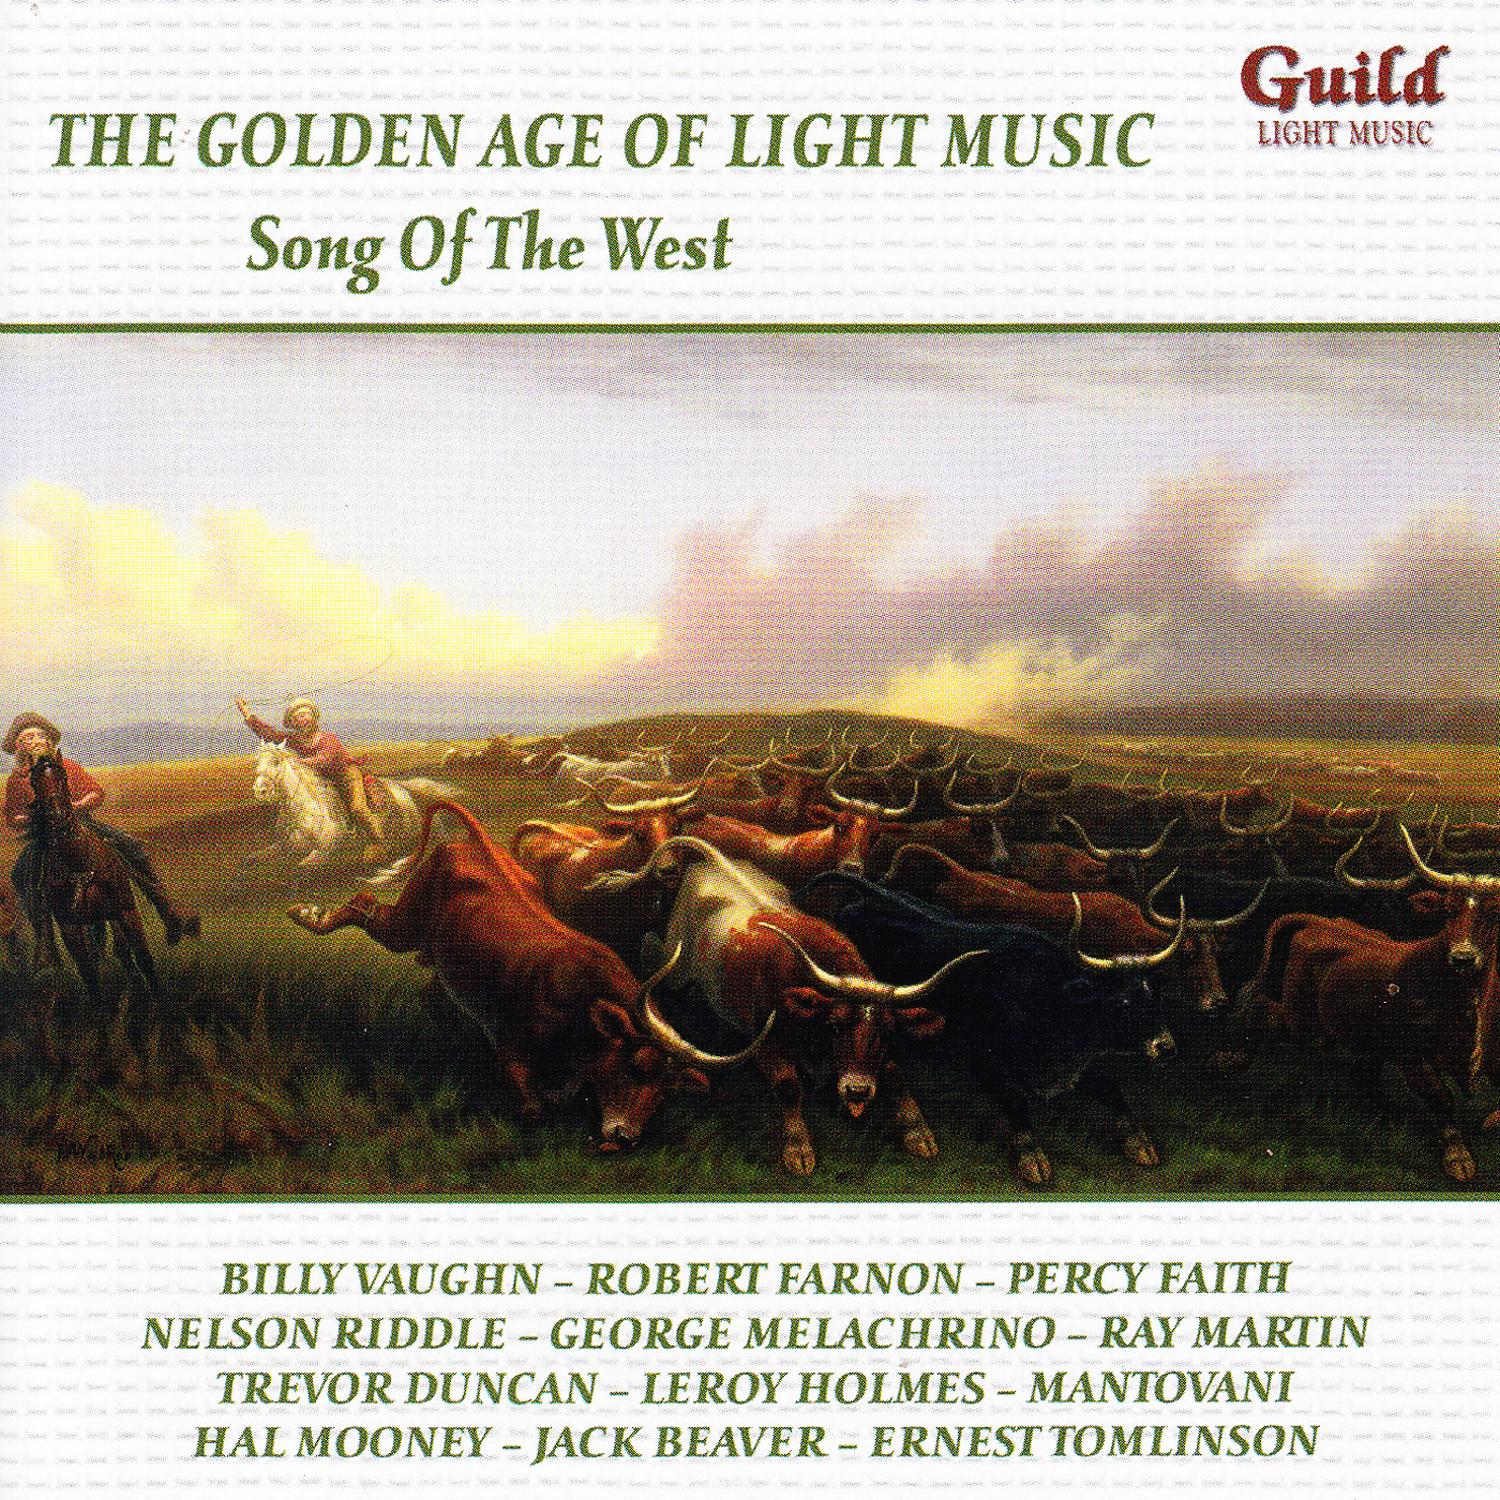 The Golden Age of Light Music: Song of the West